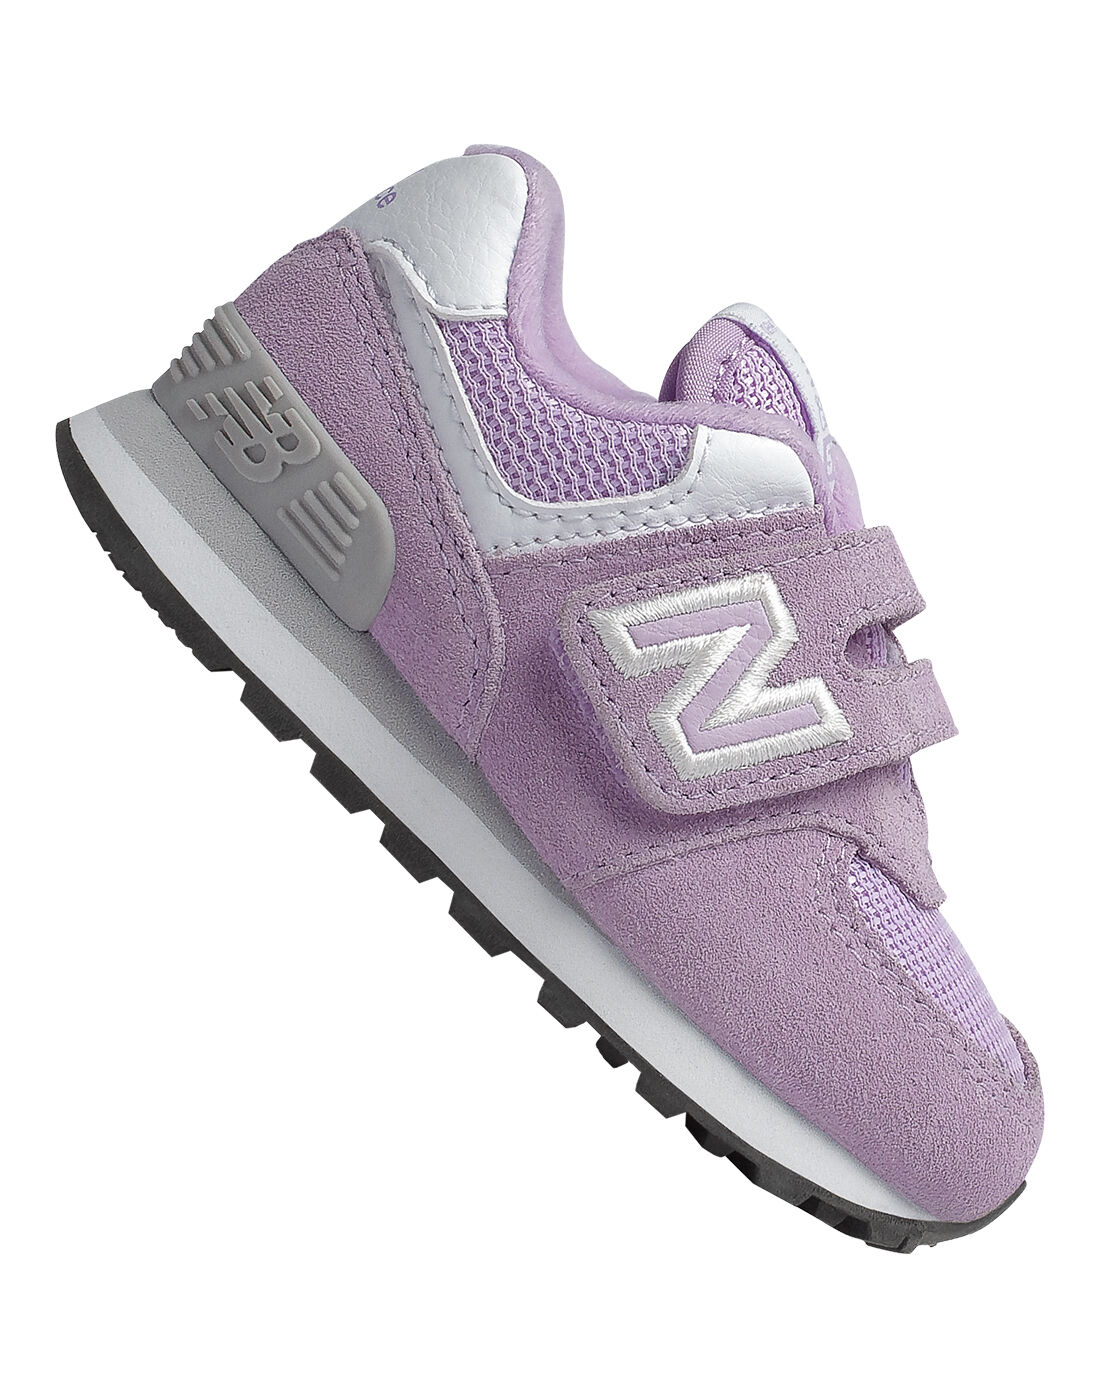 girls new balance trainers Shop Clothing & Shoes Online